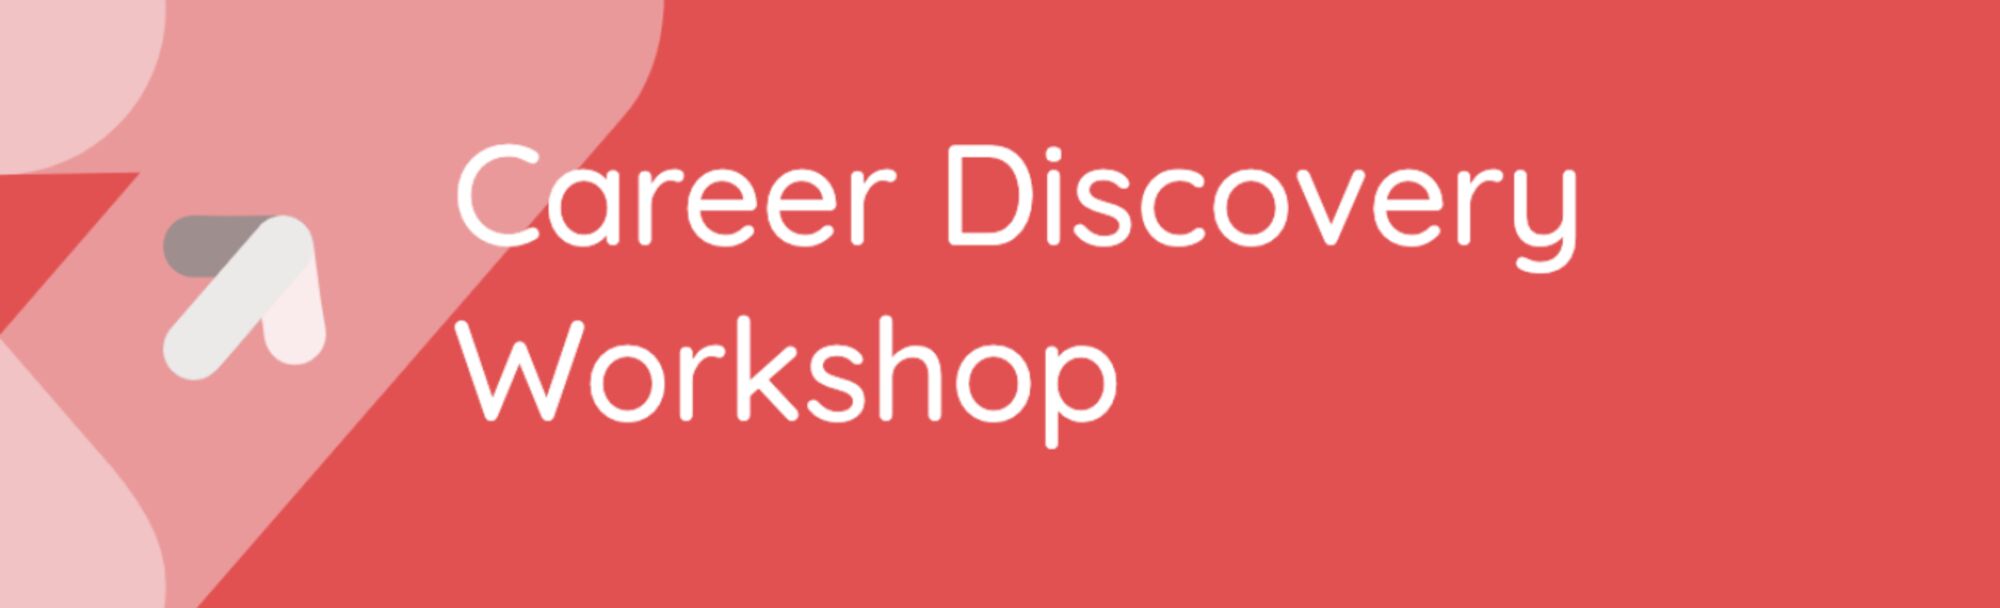 Career Discovery Workshop.png